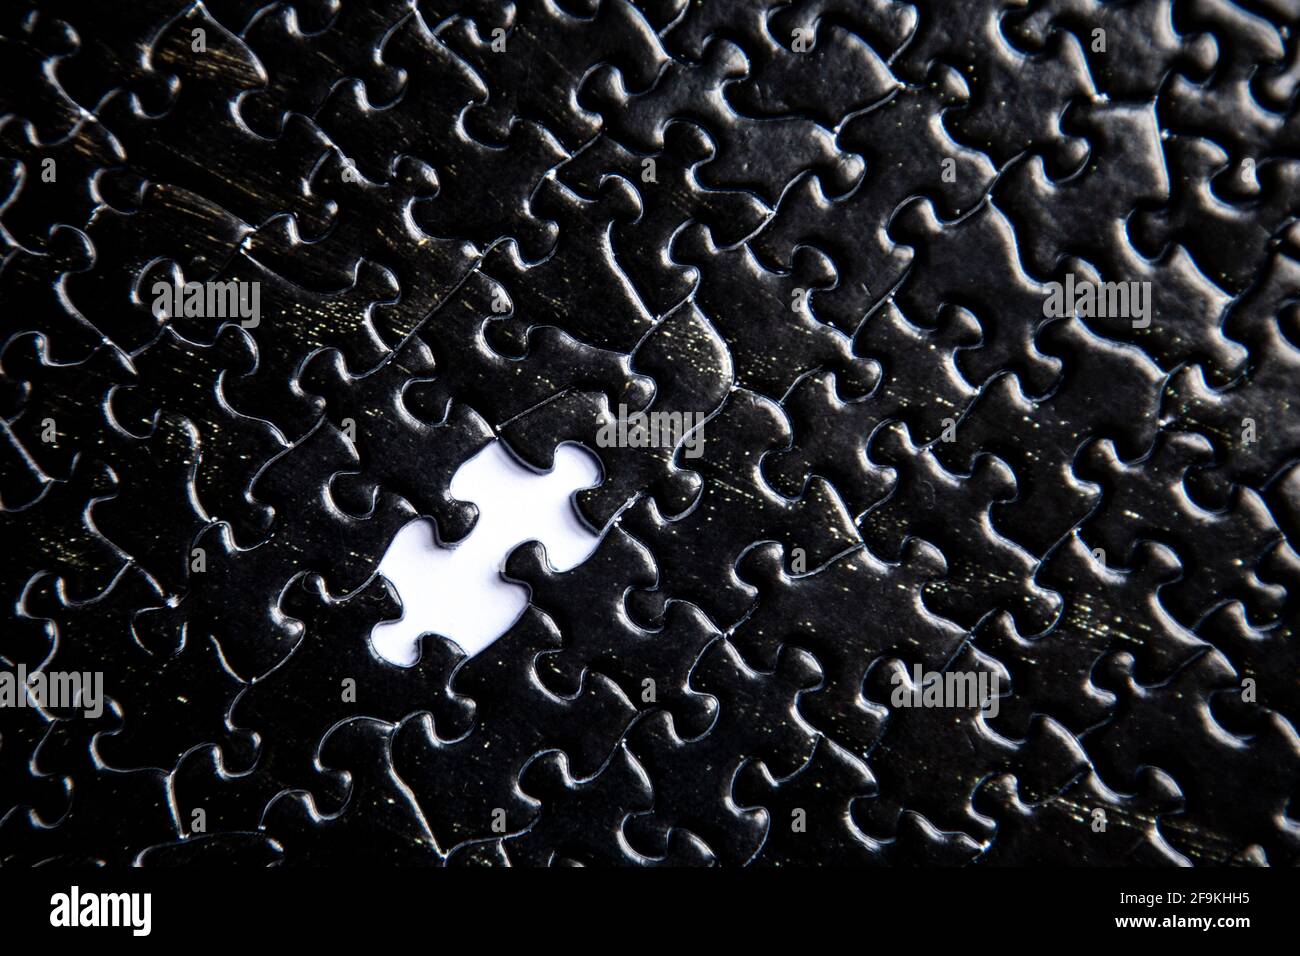 Black jigsaw puzzle pieces background with missing piece Stock Photo